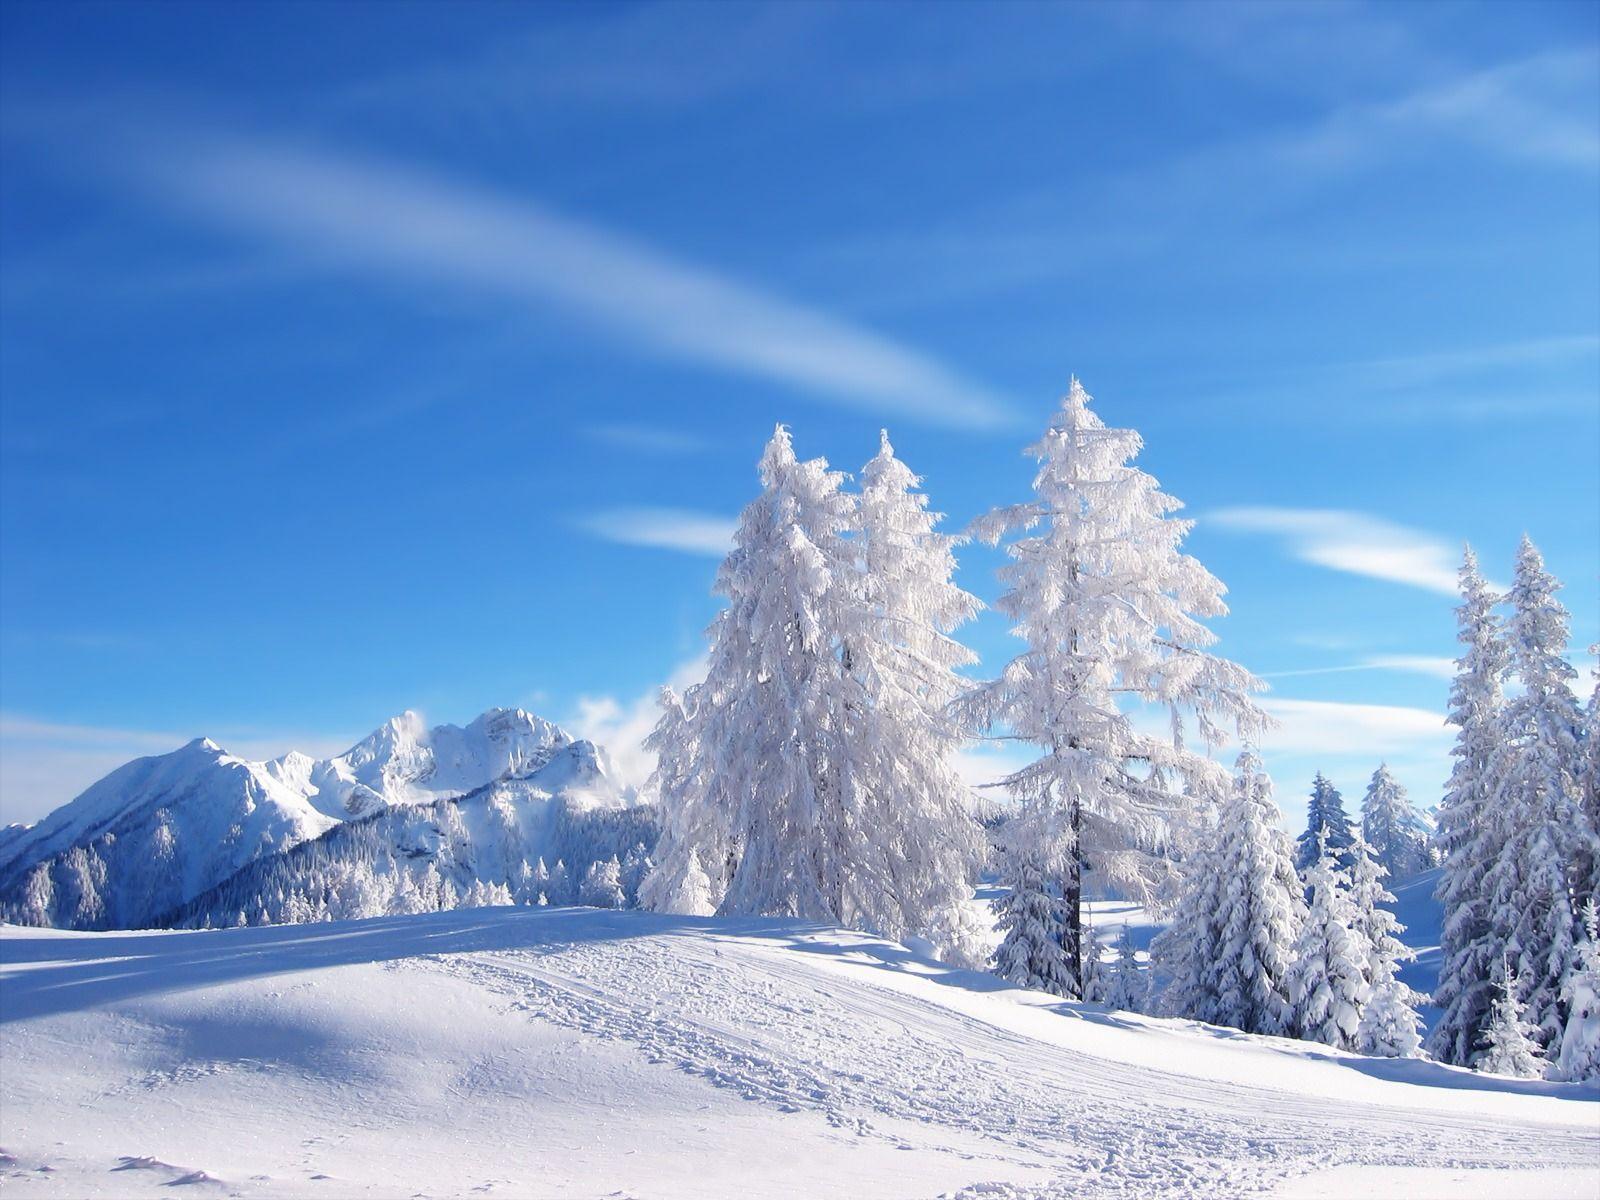 Snow Wallpapers Winter Nature Wallpapers in jpg format for free download